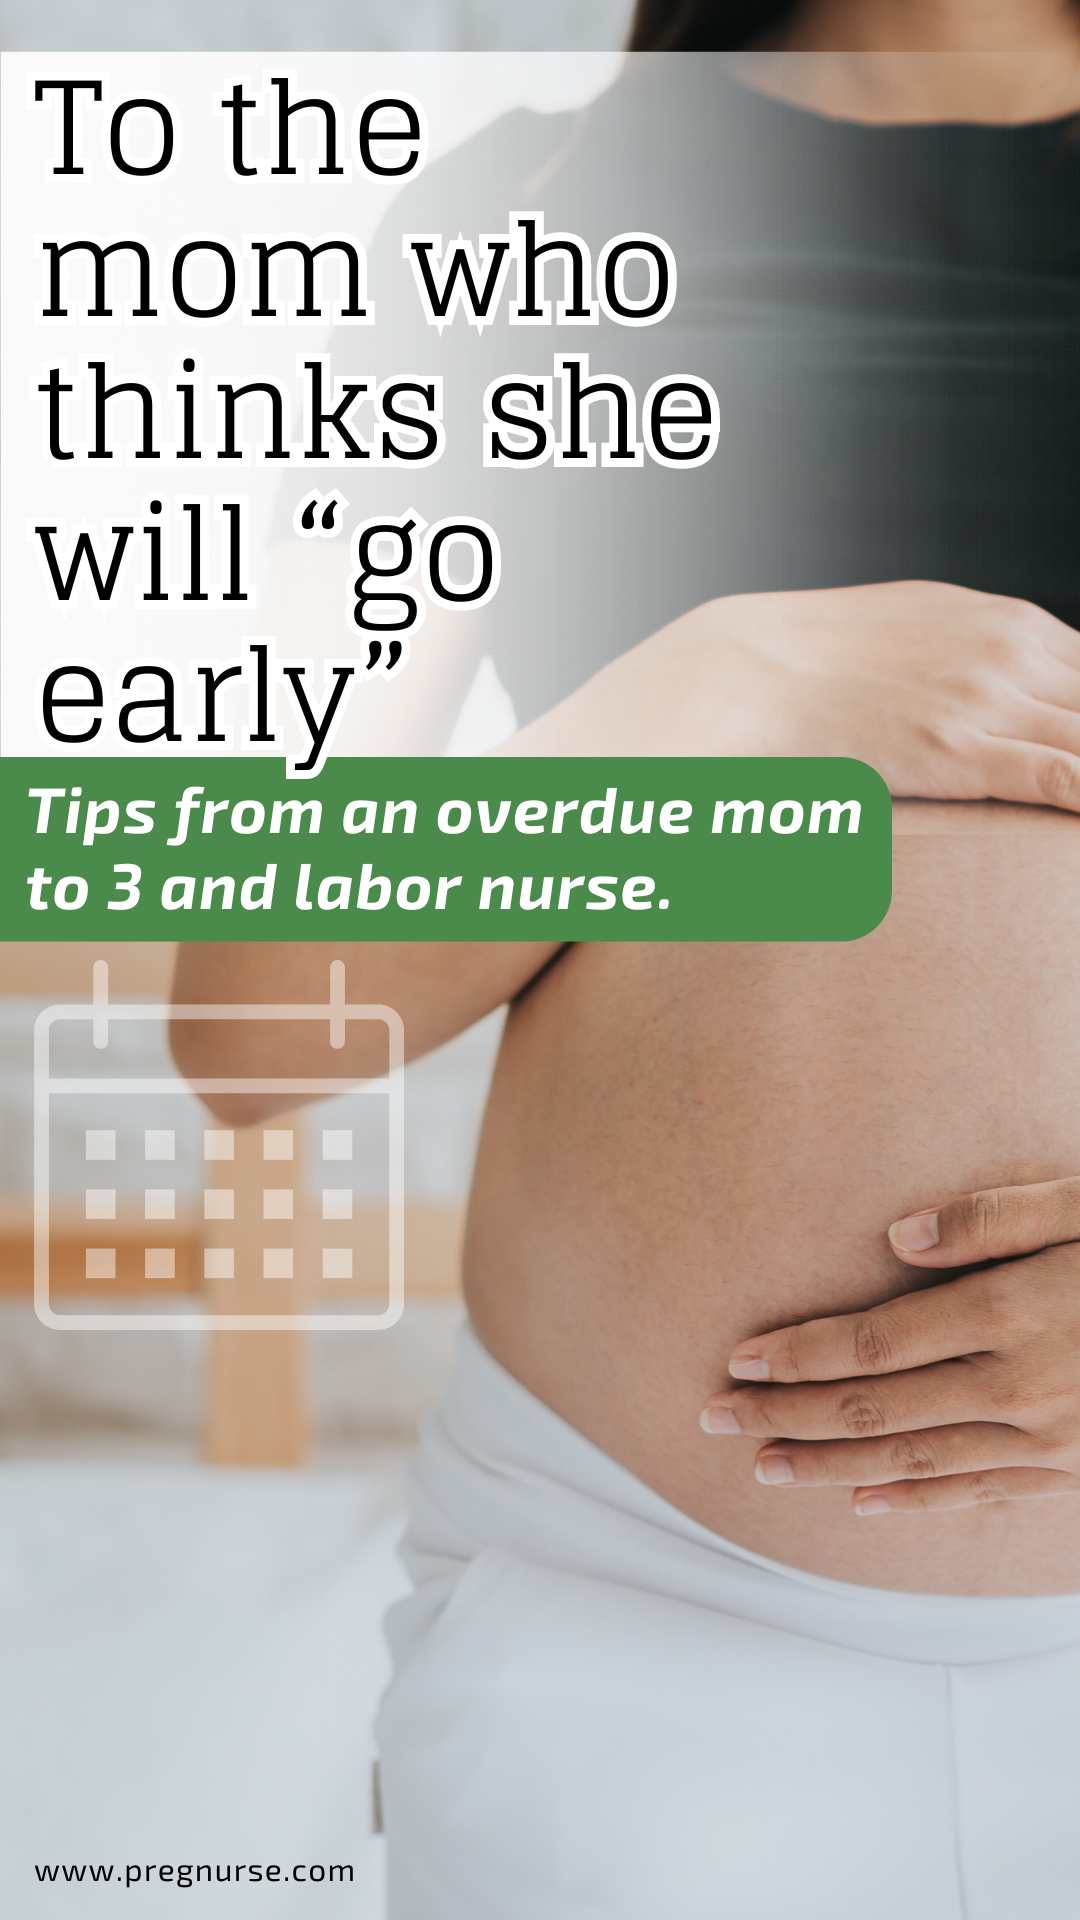 Ever pondered over the accuracy of due dates? In this pin, we take a deep dive into all the science behind due dates, the chances of going into labor early or late, and the role of inductions. No more guesswork, let's base your expectations on proper research and a nurse's two decades of experience!